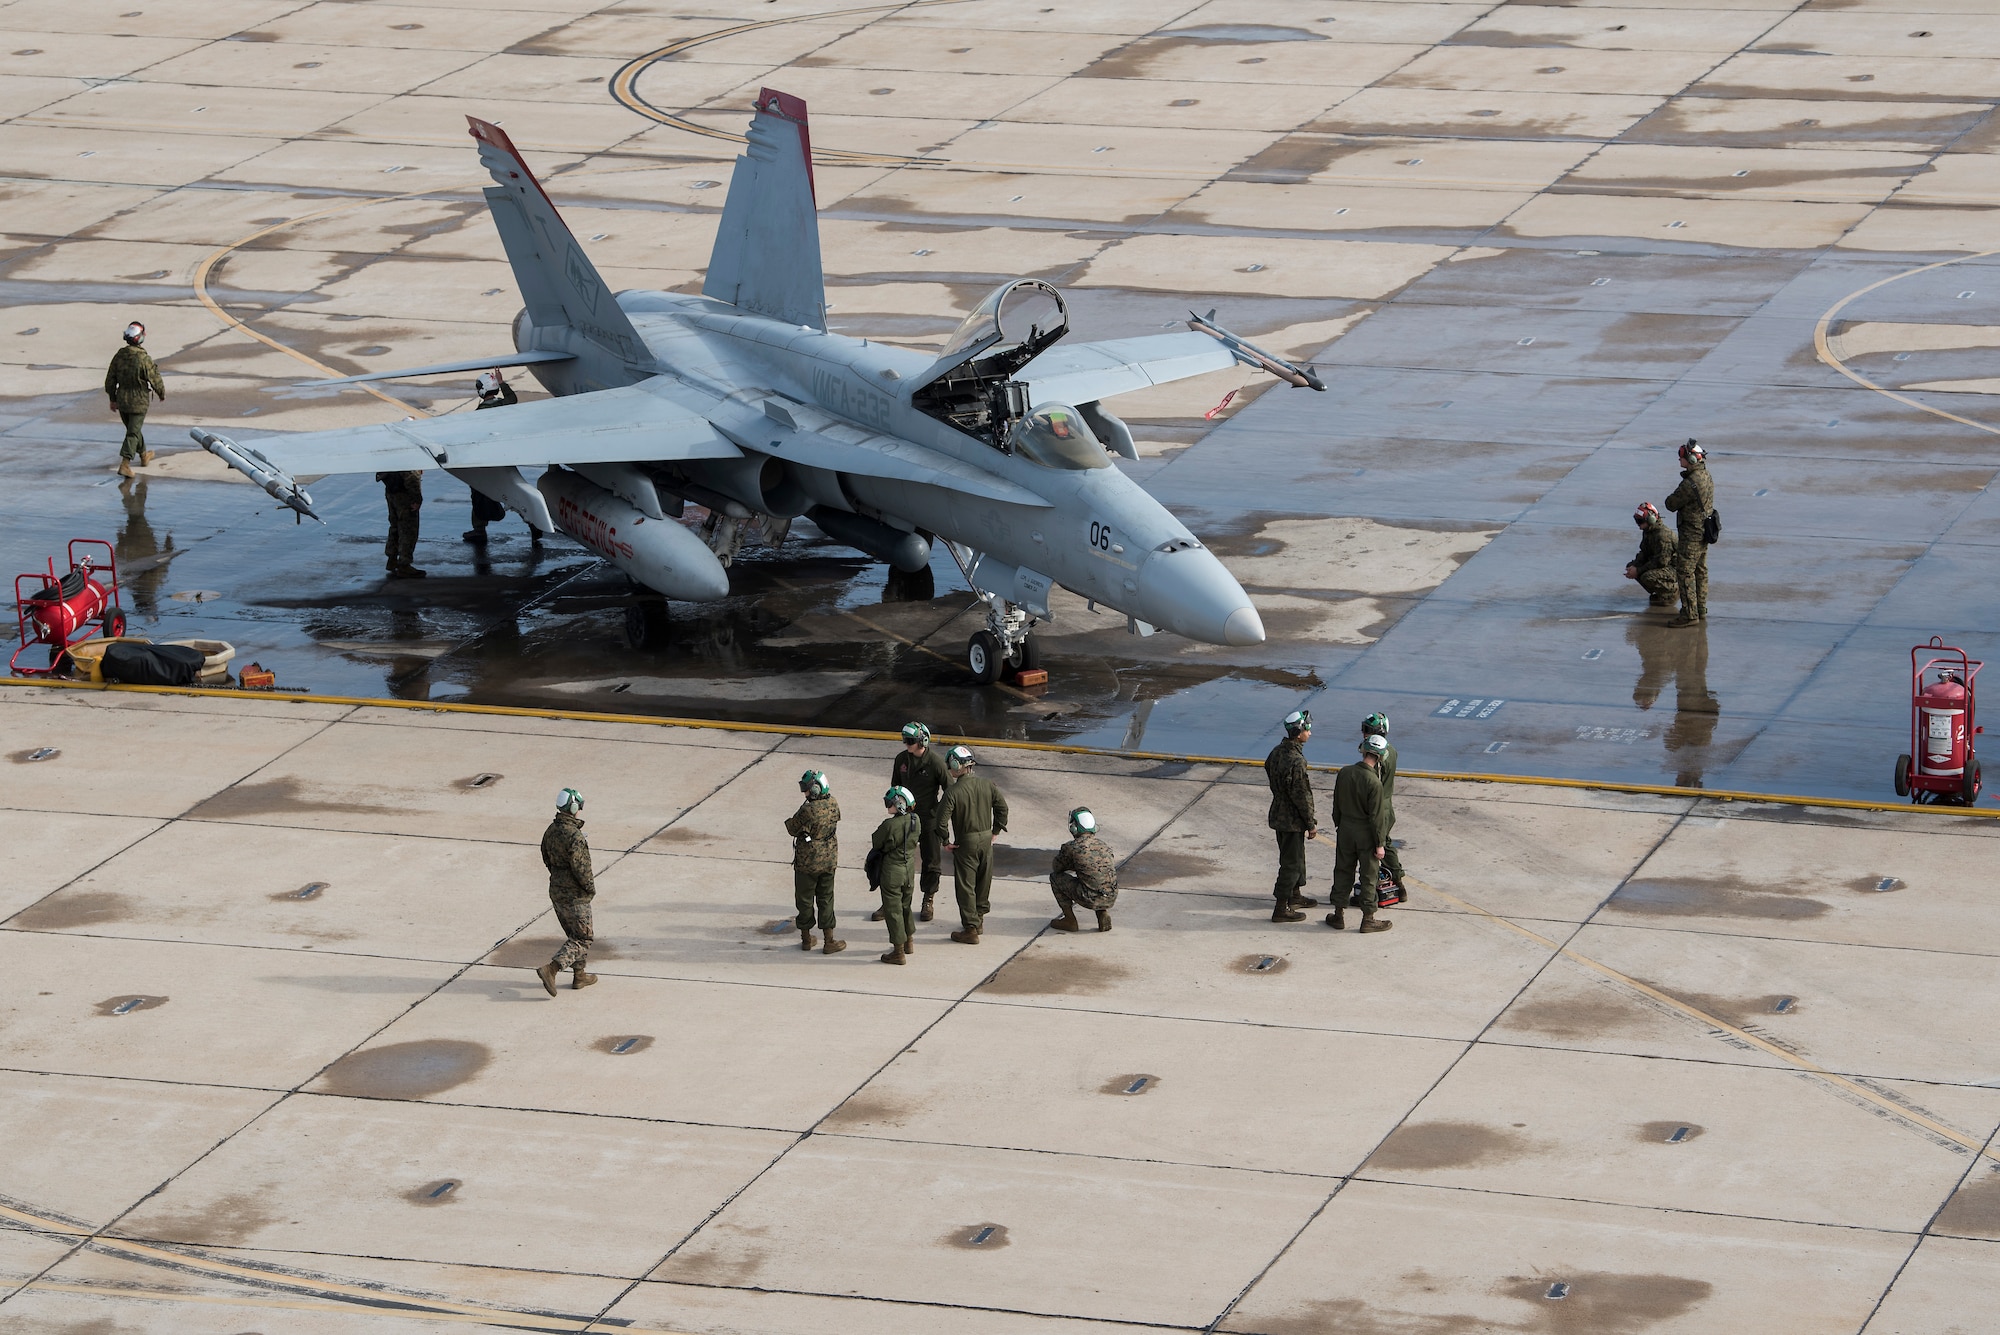 A U.S. Marine Corps F/A-18C Hornet and aircrew inspect the aircraft during joint exercise Winter Fury at Marine Corps Air Station Miramar, San Diego, Calif., Jan. 16, 2019. Winter Fury involved both Marine F/A-18C Hornets, and Navy F-35C Lightning II’s, partnering with Air Force F-22 Raptors to perform air-to-air combat, while protecting ground assets.